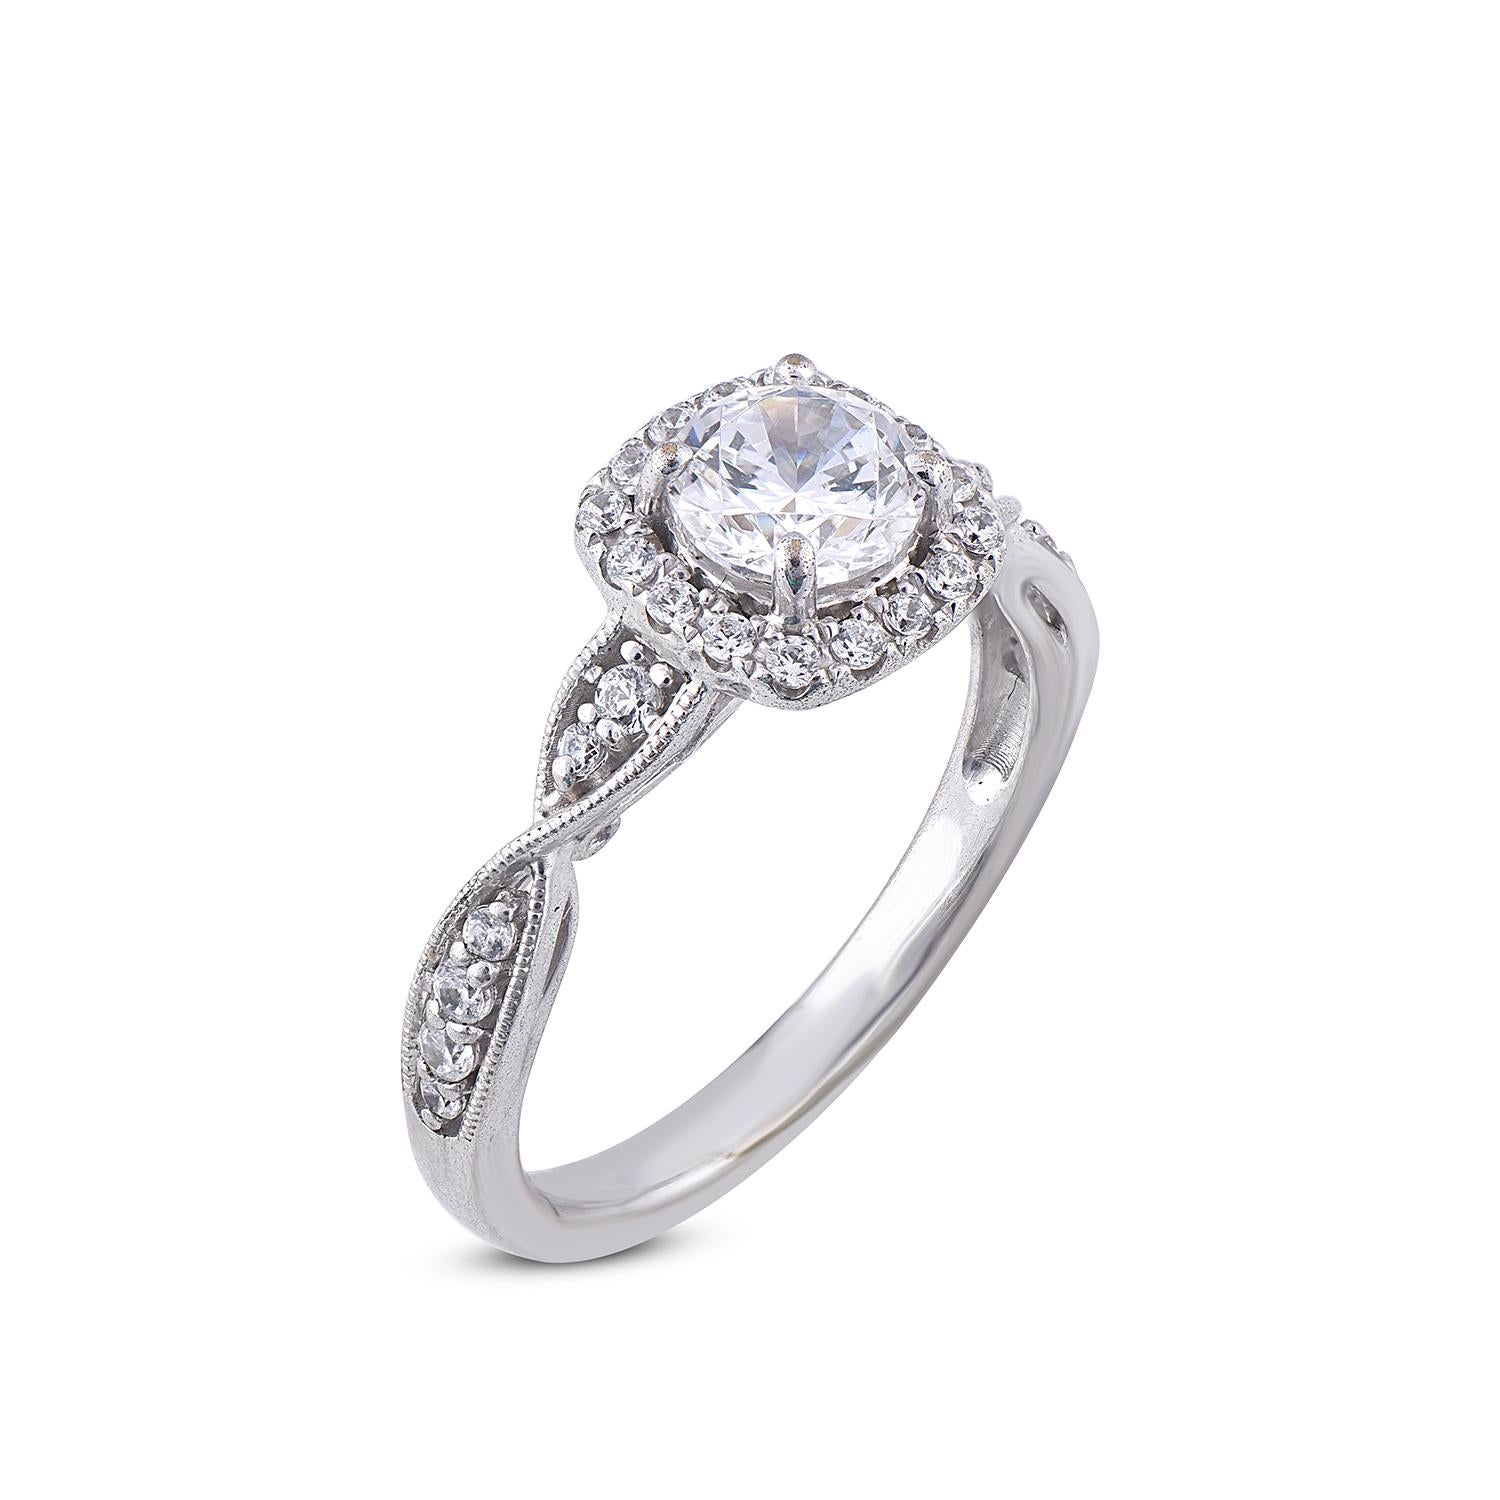 Classic and Contemporary, this diamond ring will enhance her jewelry collection. Embellished in 31 round diamond with 0.80 ct of center stone and 0.78 ct of diamond frame and twisted shank embellished beautifully in prong setting. Hand crafted